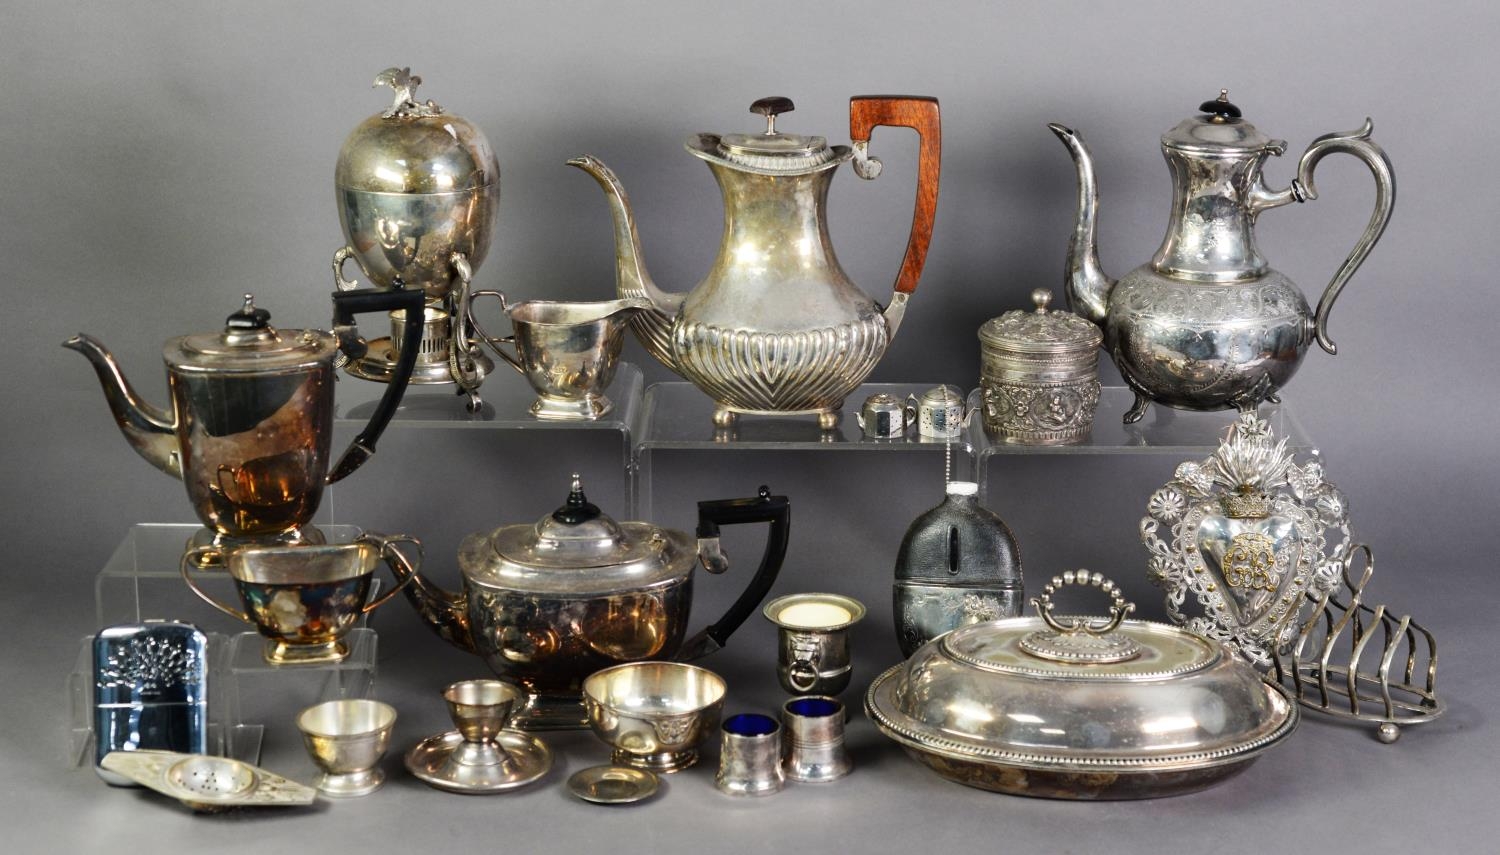 SELECTION OF ELECTRO-PLATED ITEMS including an entree dish, four piece tea and coffee service, egg